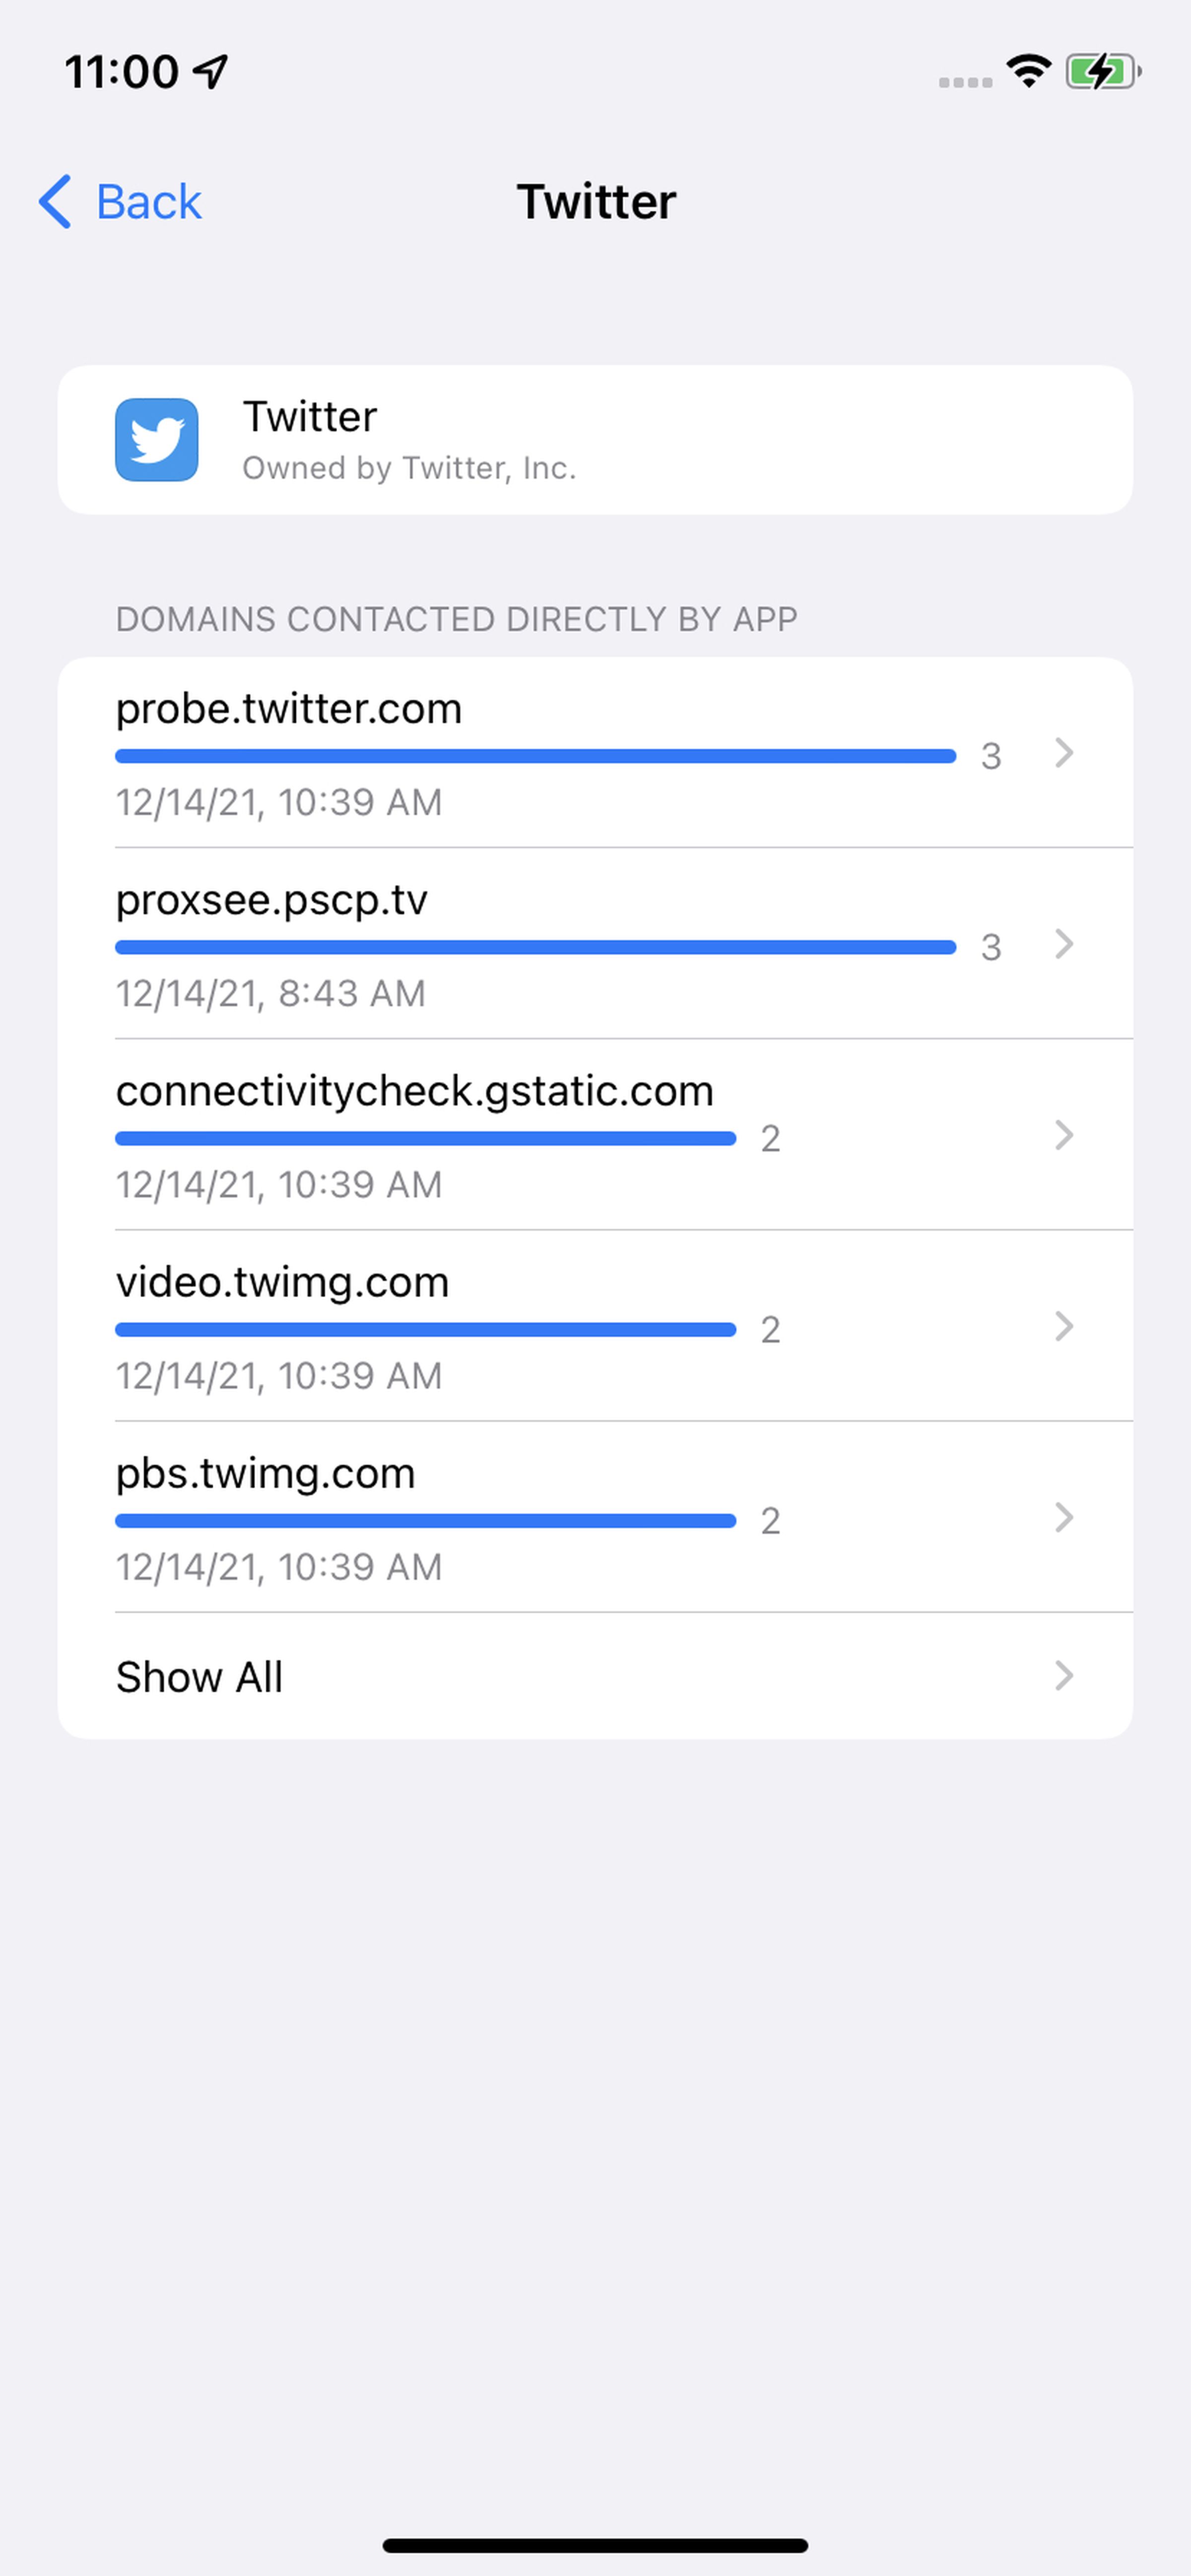 You can also see each app’s network activity.